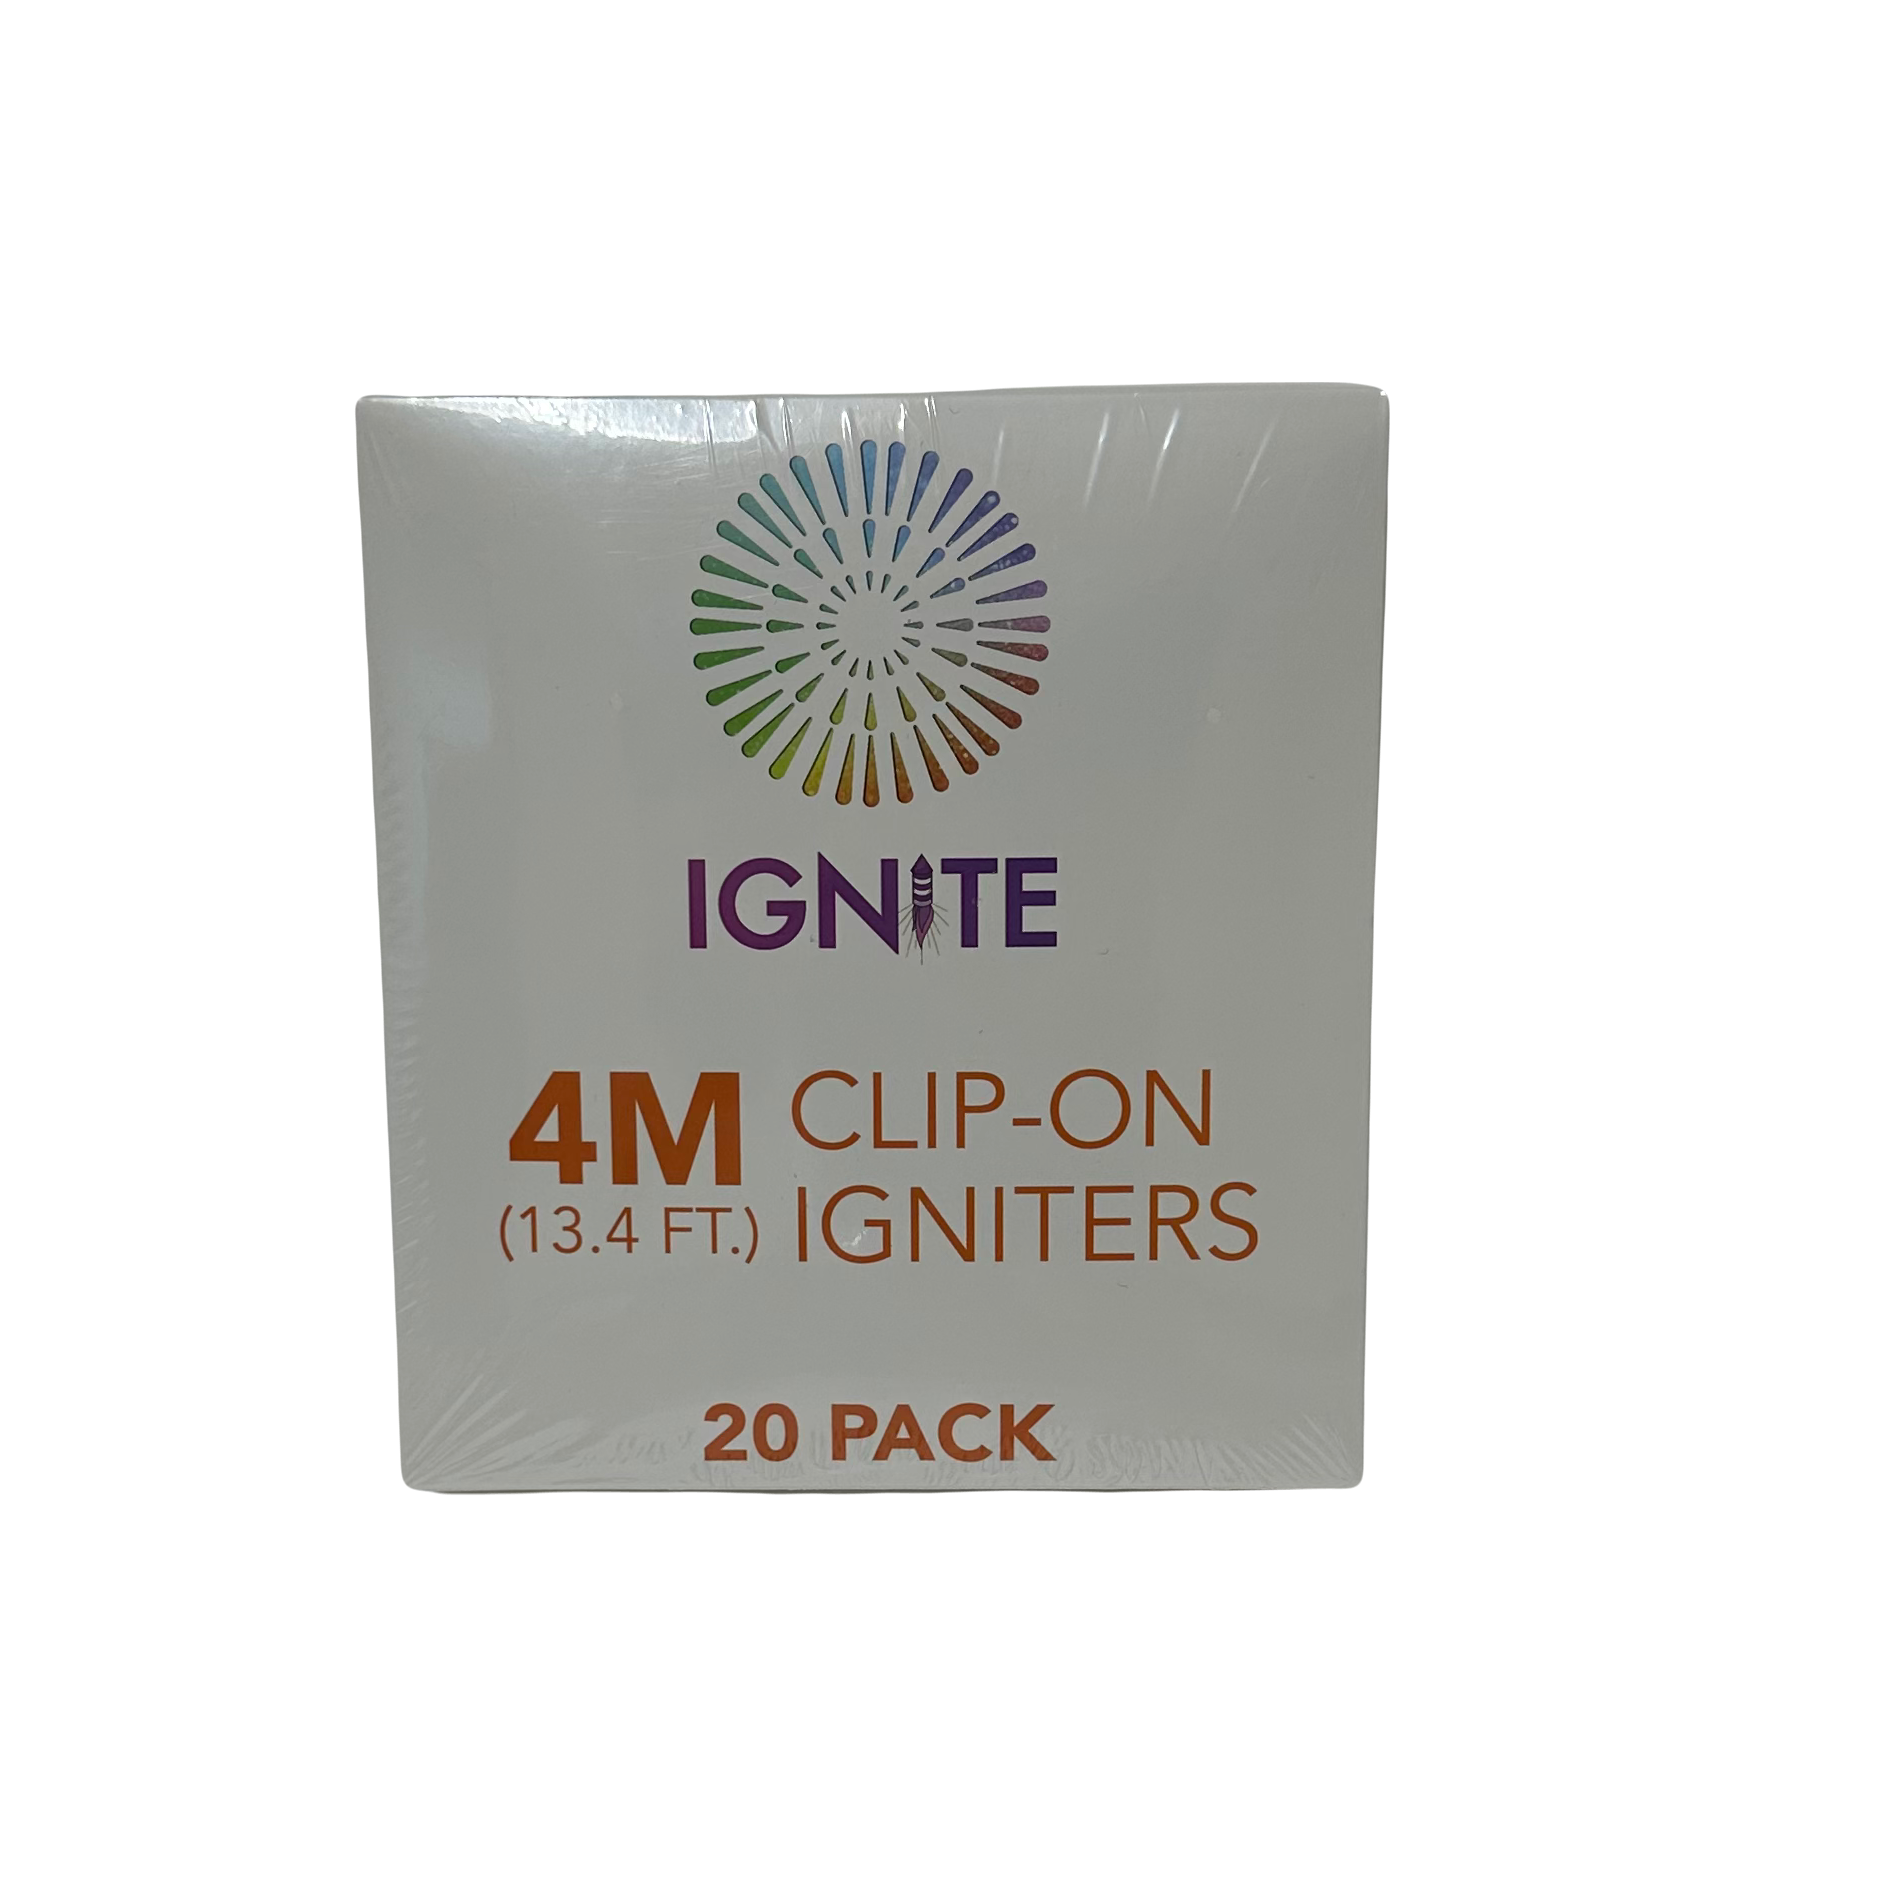 4M CLIP-ON IGNITERS (20 PACK)